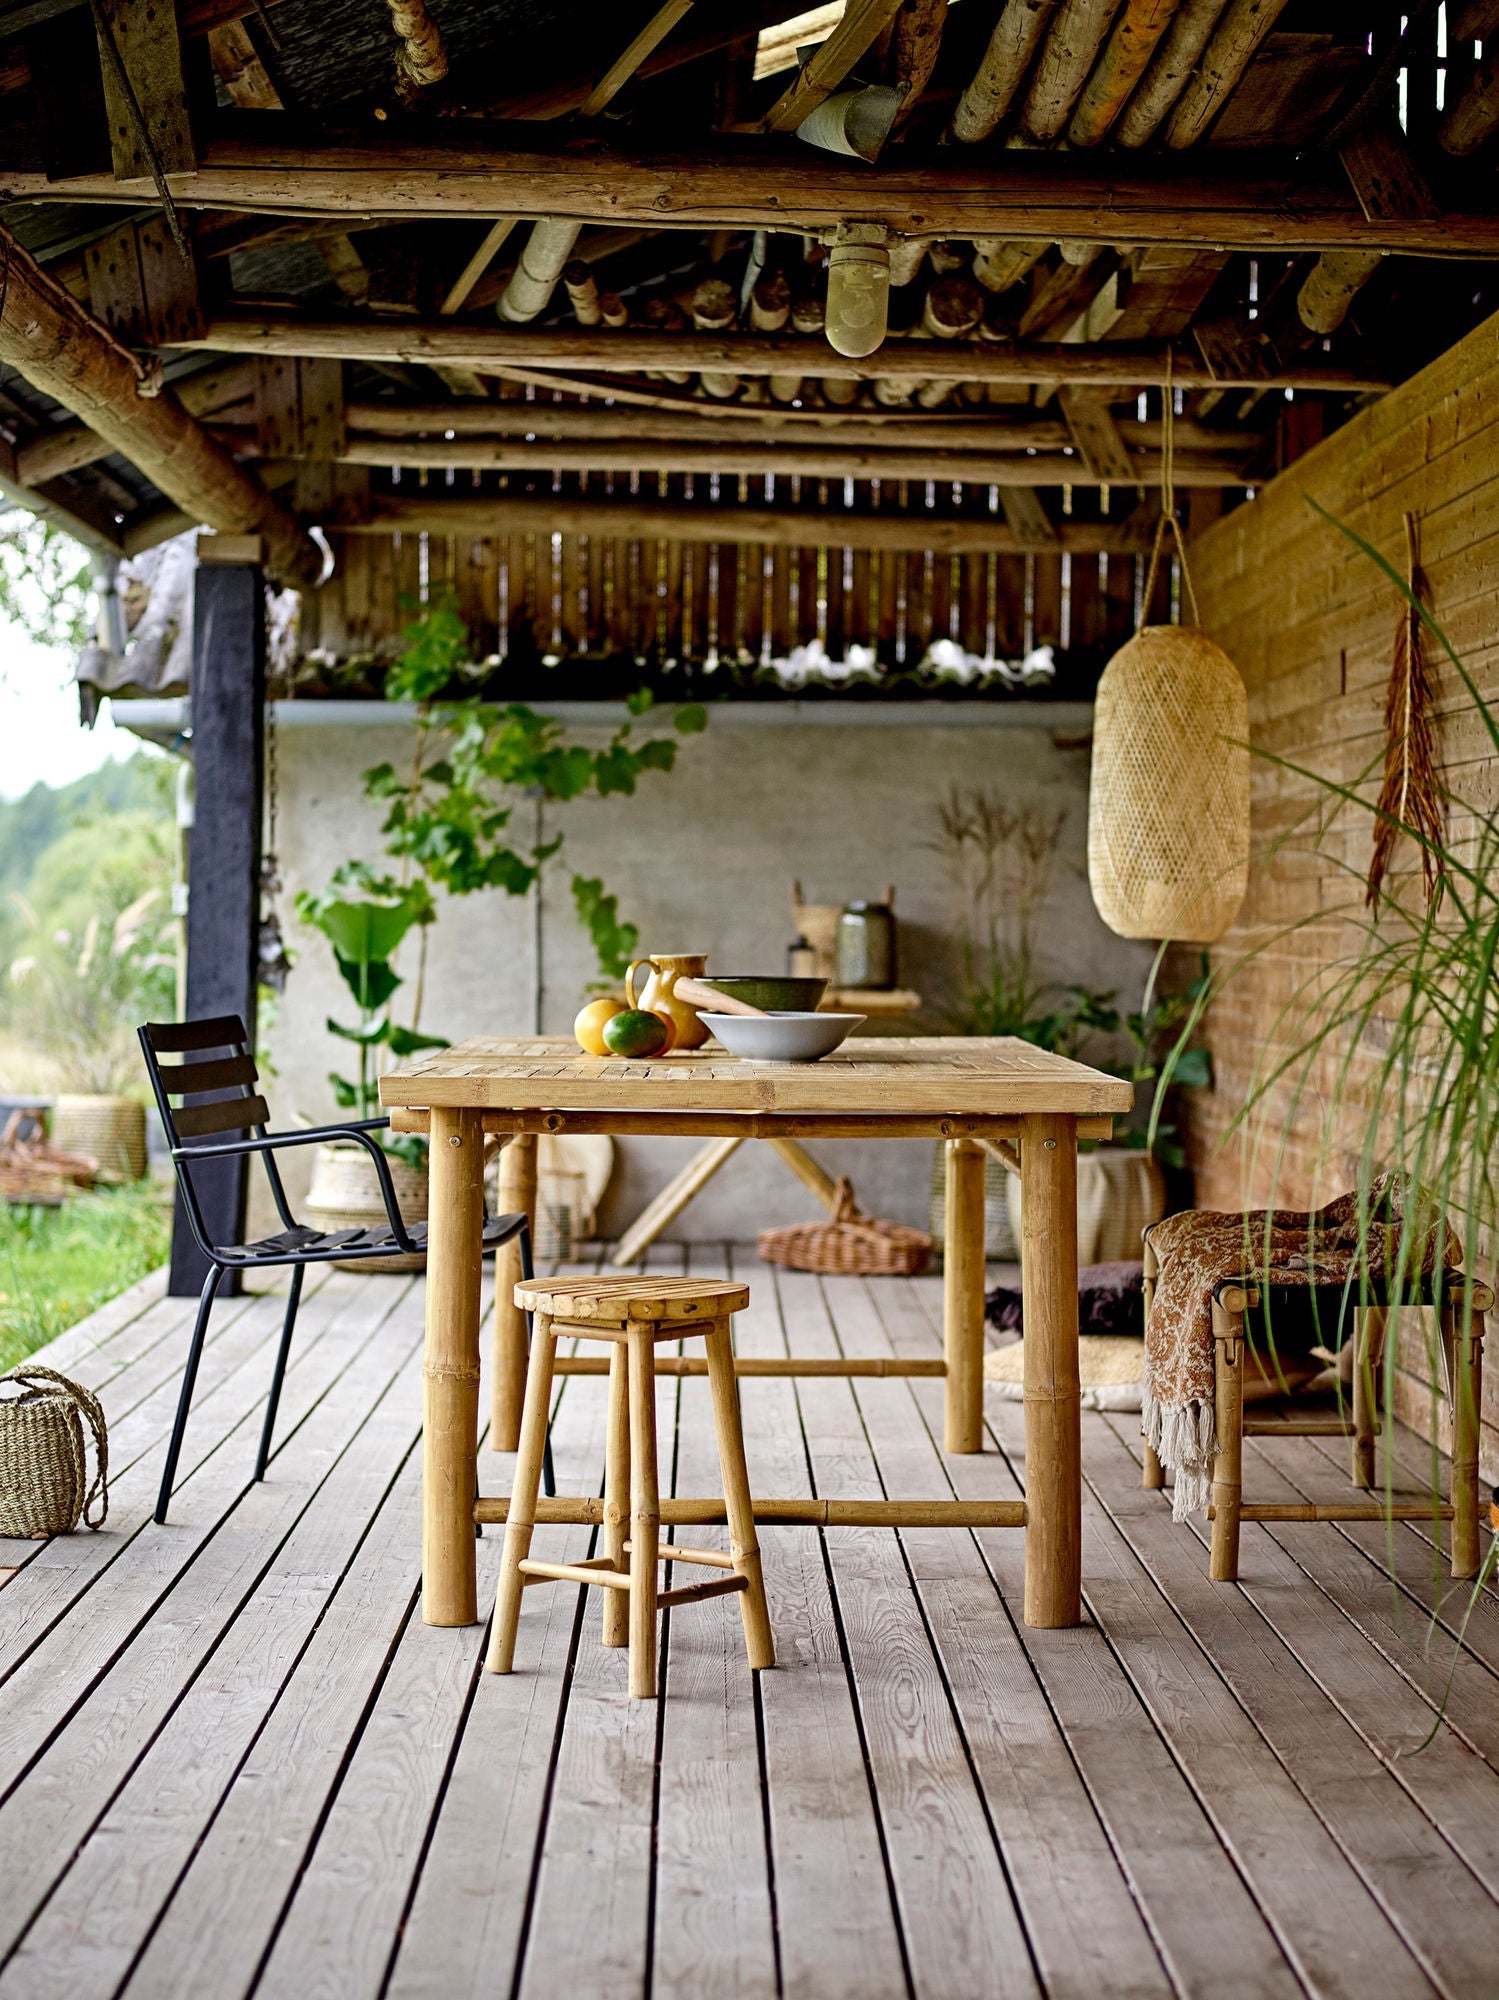 Bloomingville Sole Dining Table, Nature, Bamboo